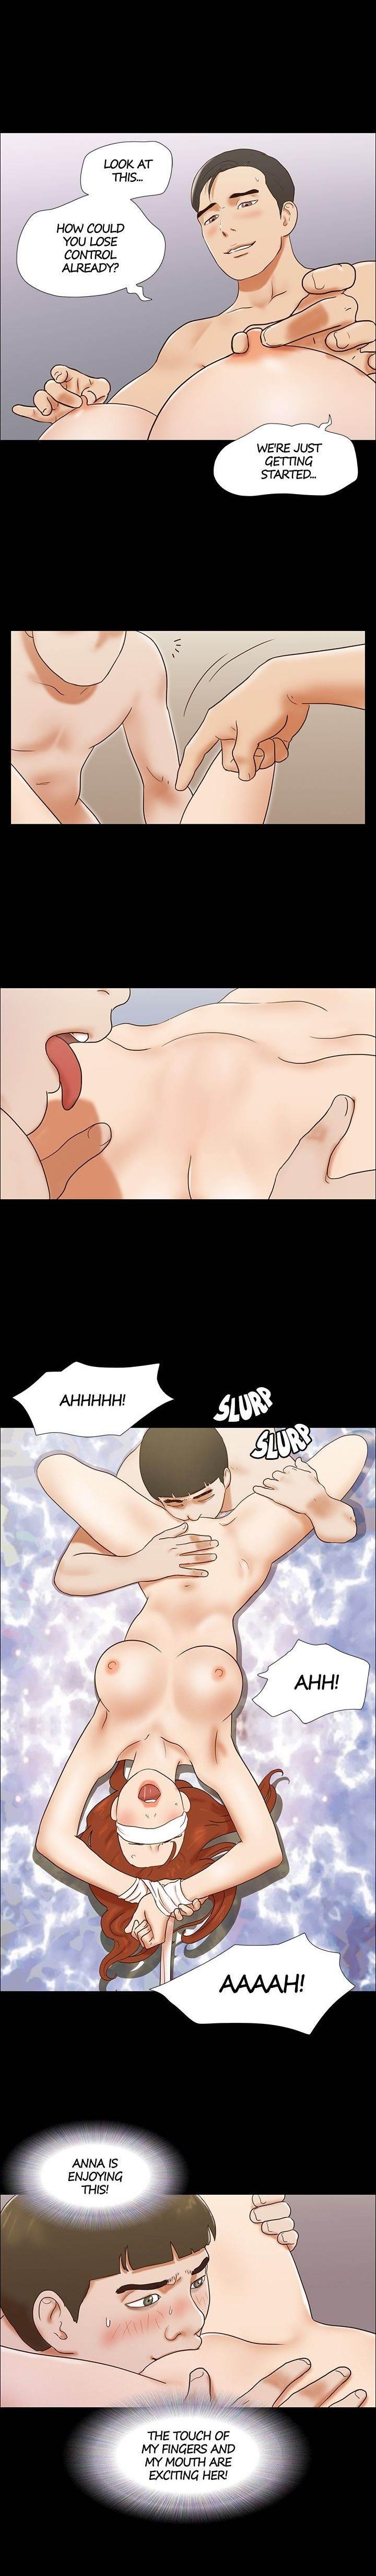 [Mulduck] Couple Game: 17 Sex Fantasies Ver.2 - Ch.41 - 63 END [English] 201